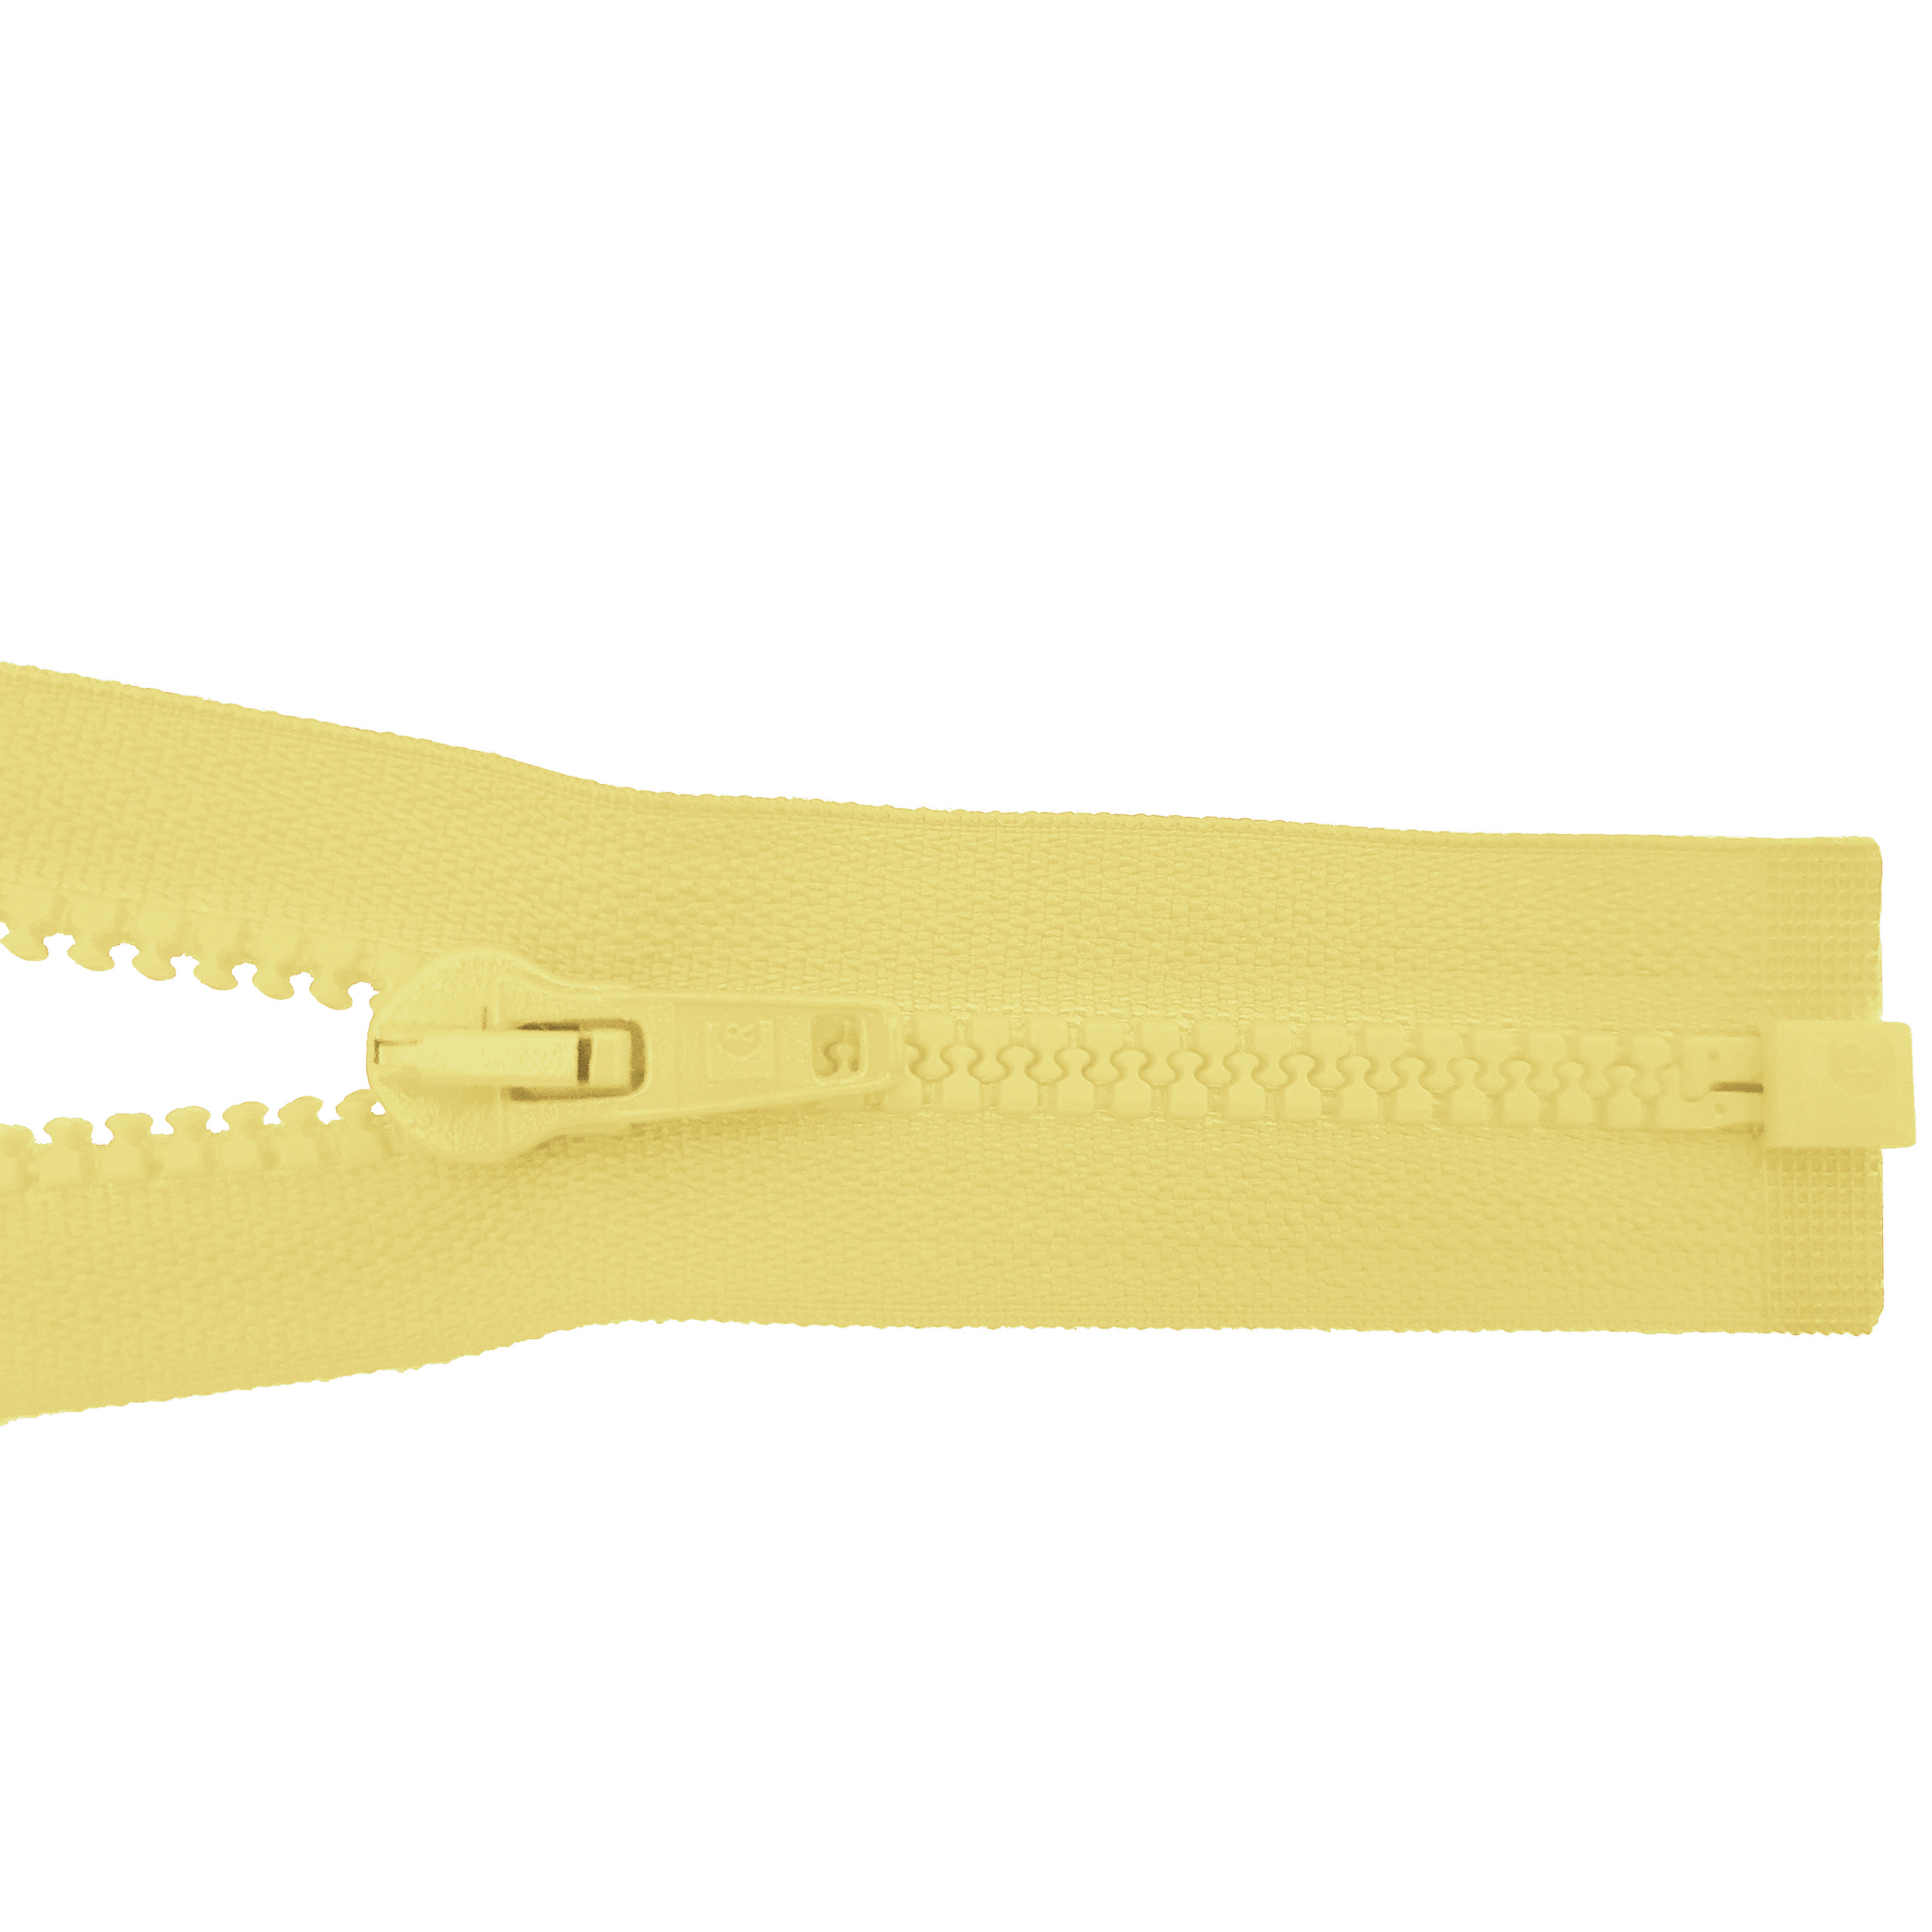 zipper 80cm,divisible, molded plastic, wide, light yellow